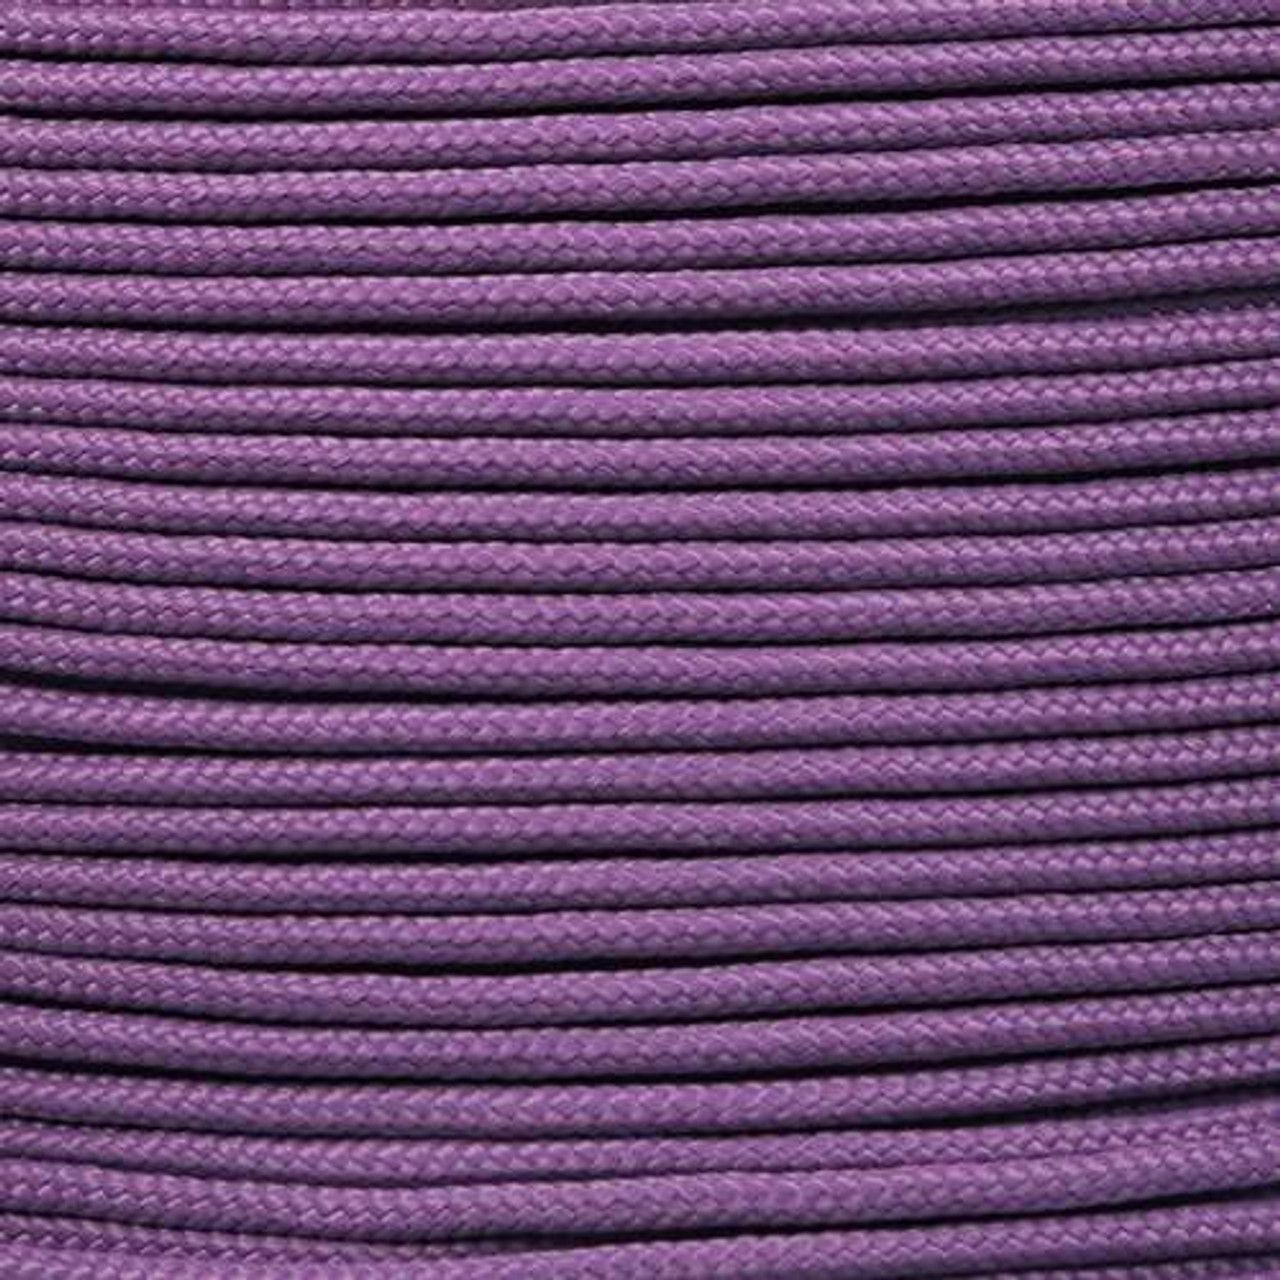 Lilac - 425 Paracord - 100ft